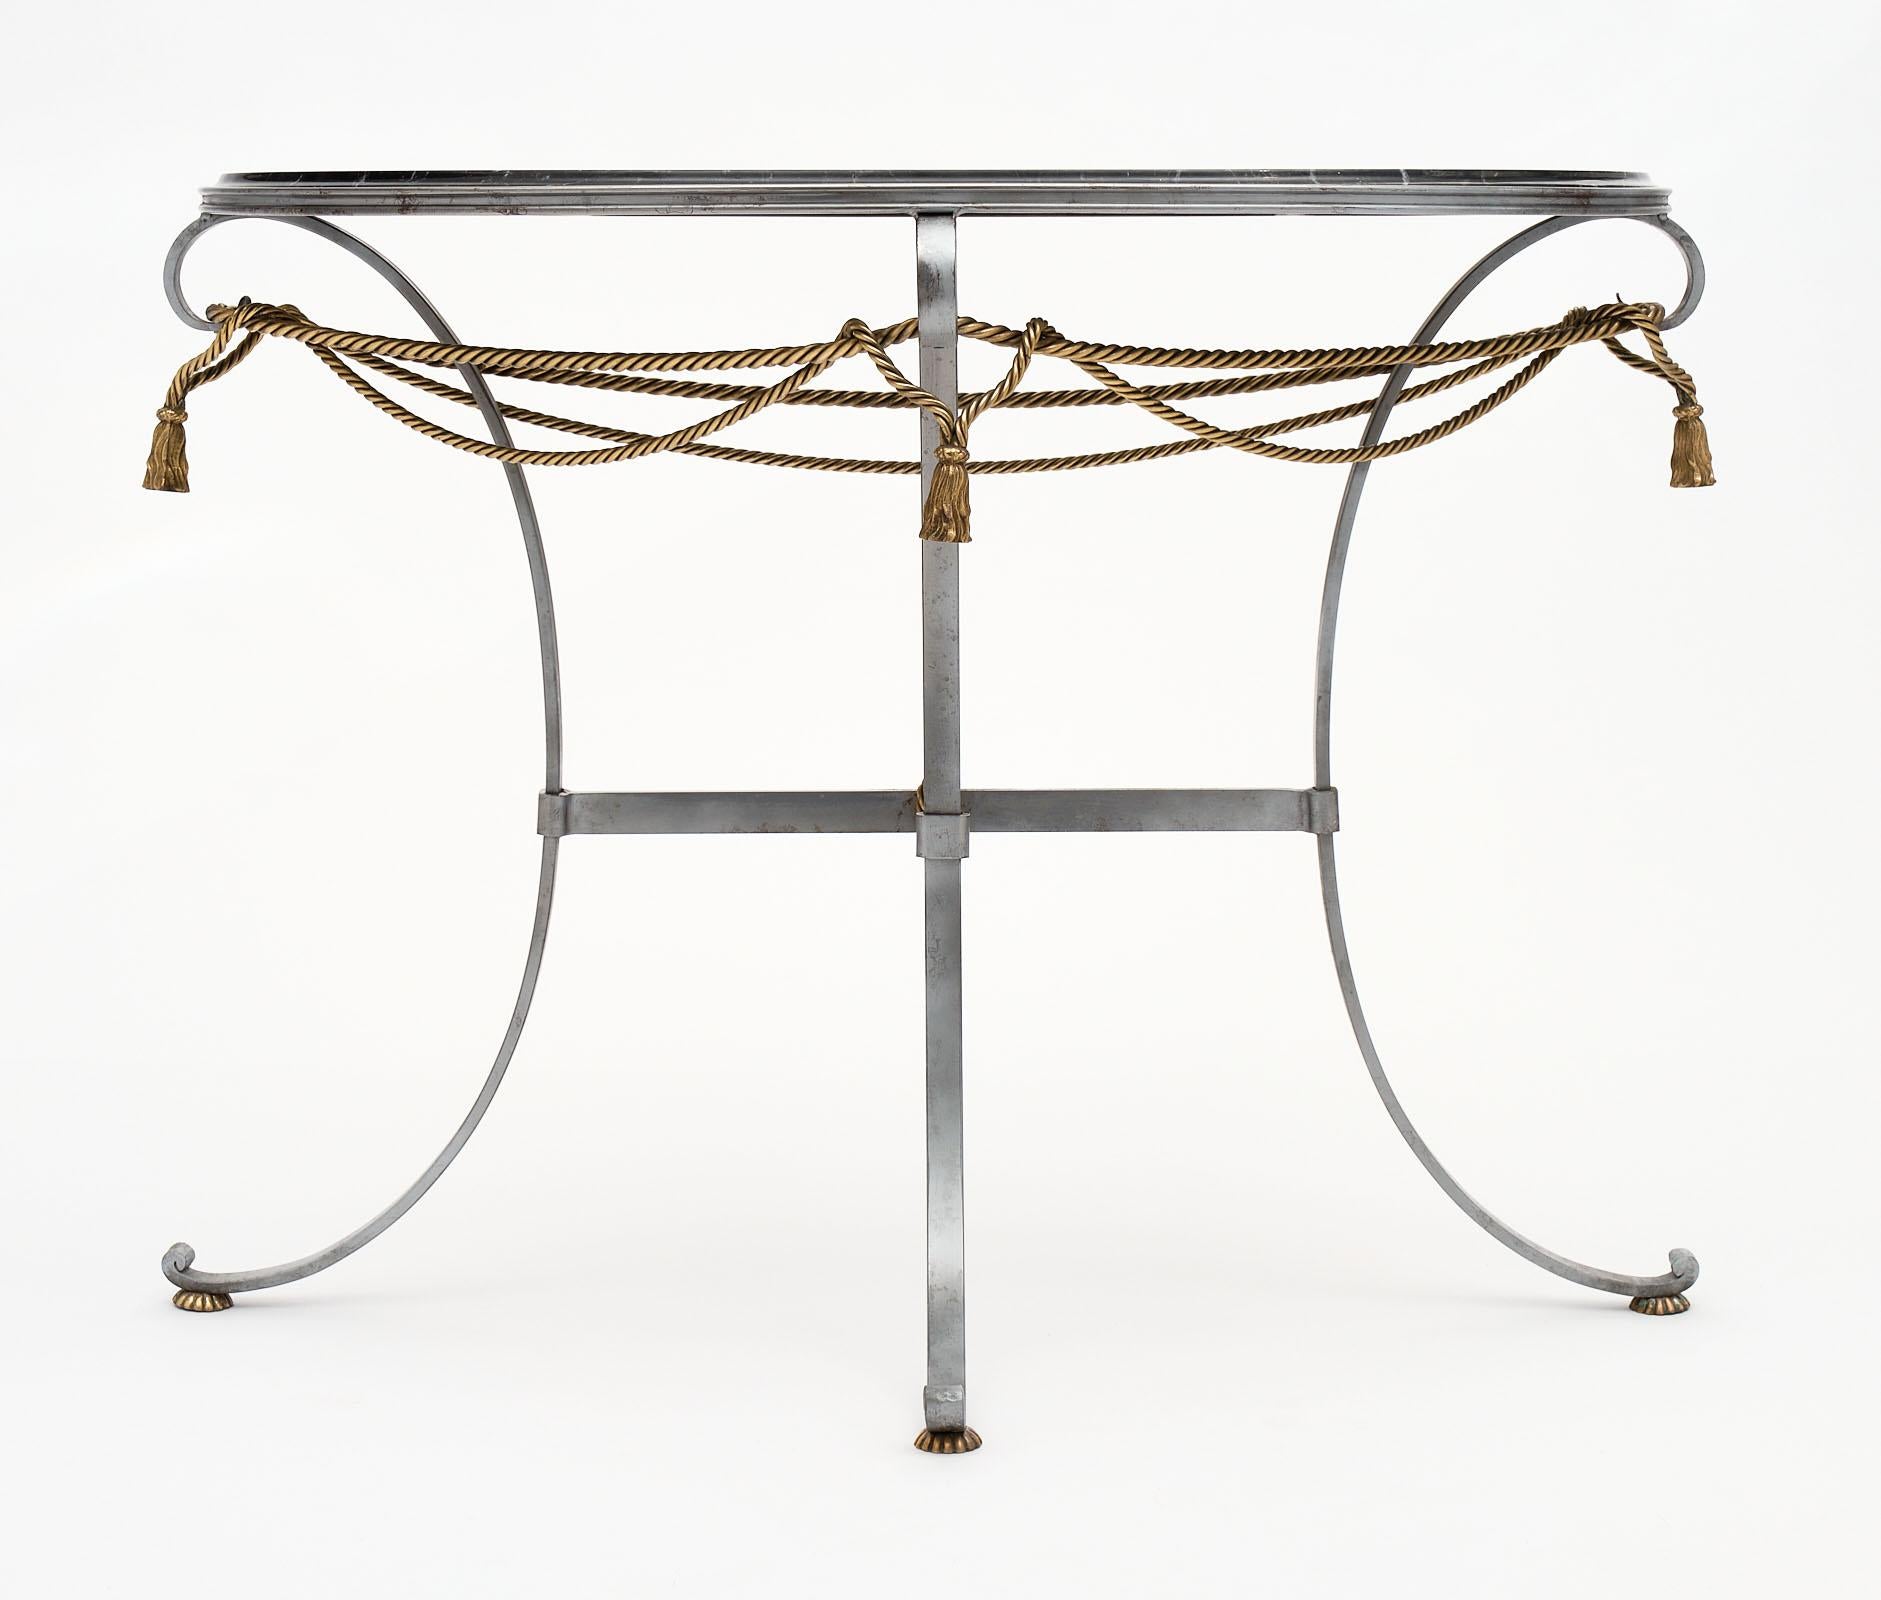 Vintage console table in a demilune shape with a black marble top. The base is made of steel with brass stylized decor of interlaced ropes. The top is black marble with beautiful veining throughout.